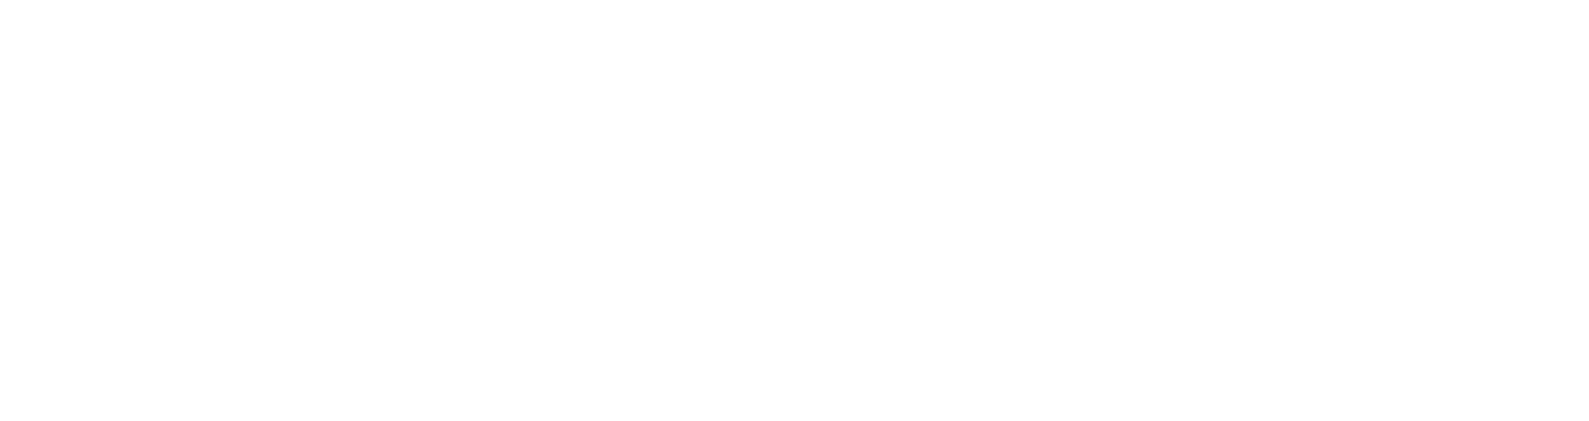 TG Therapeutics logo large for dark backgrounds (transparent PNG)